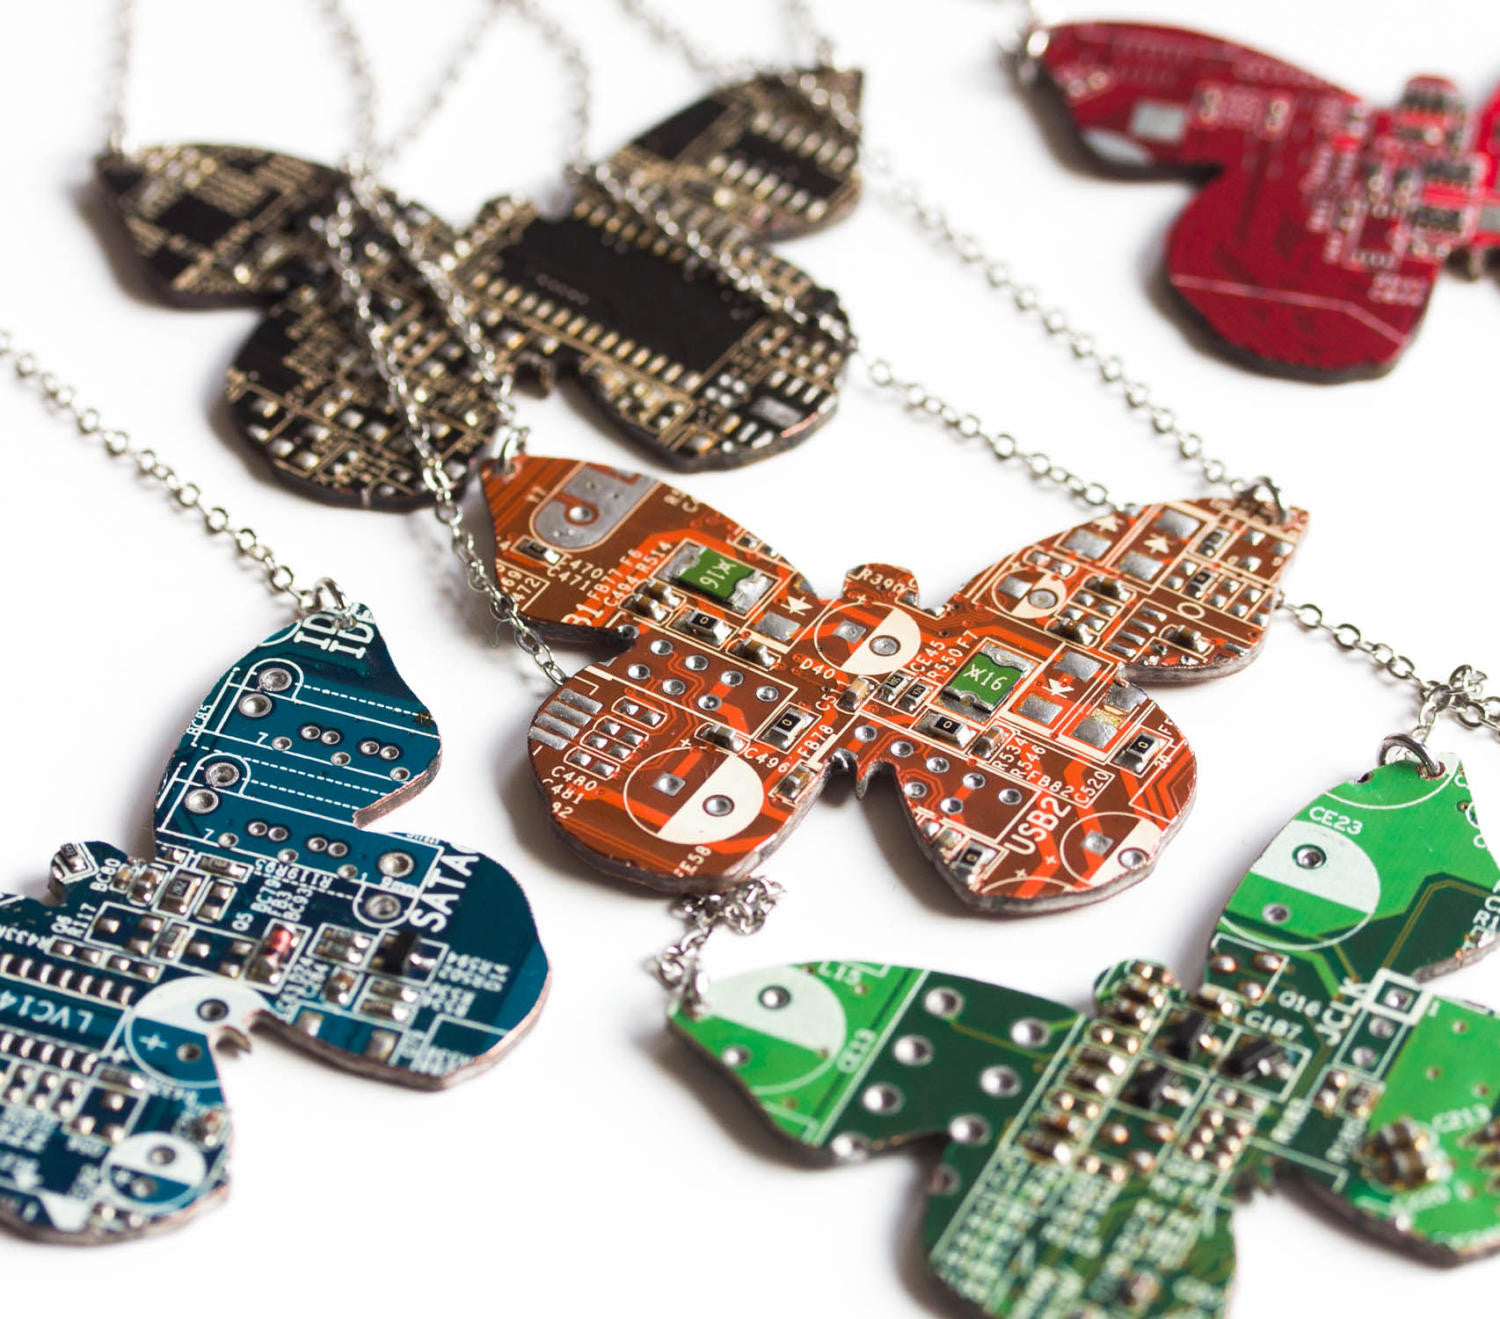 Geeky butterfly necklace made of circuit board